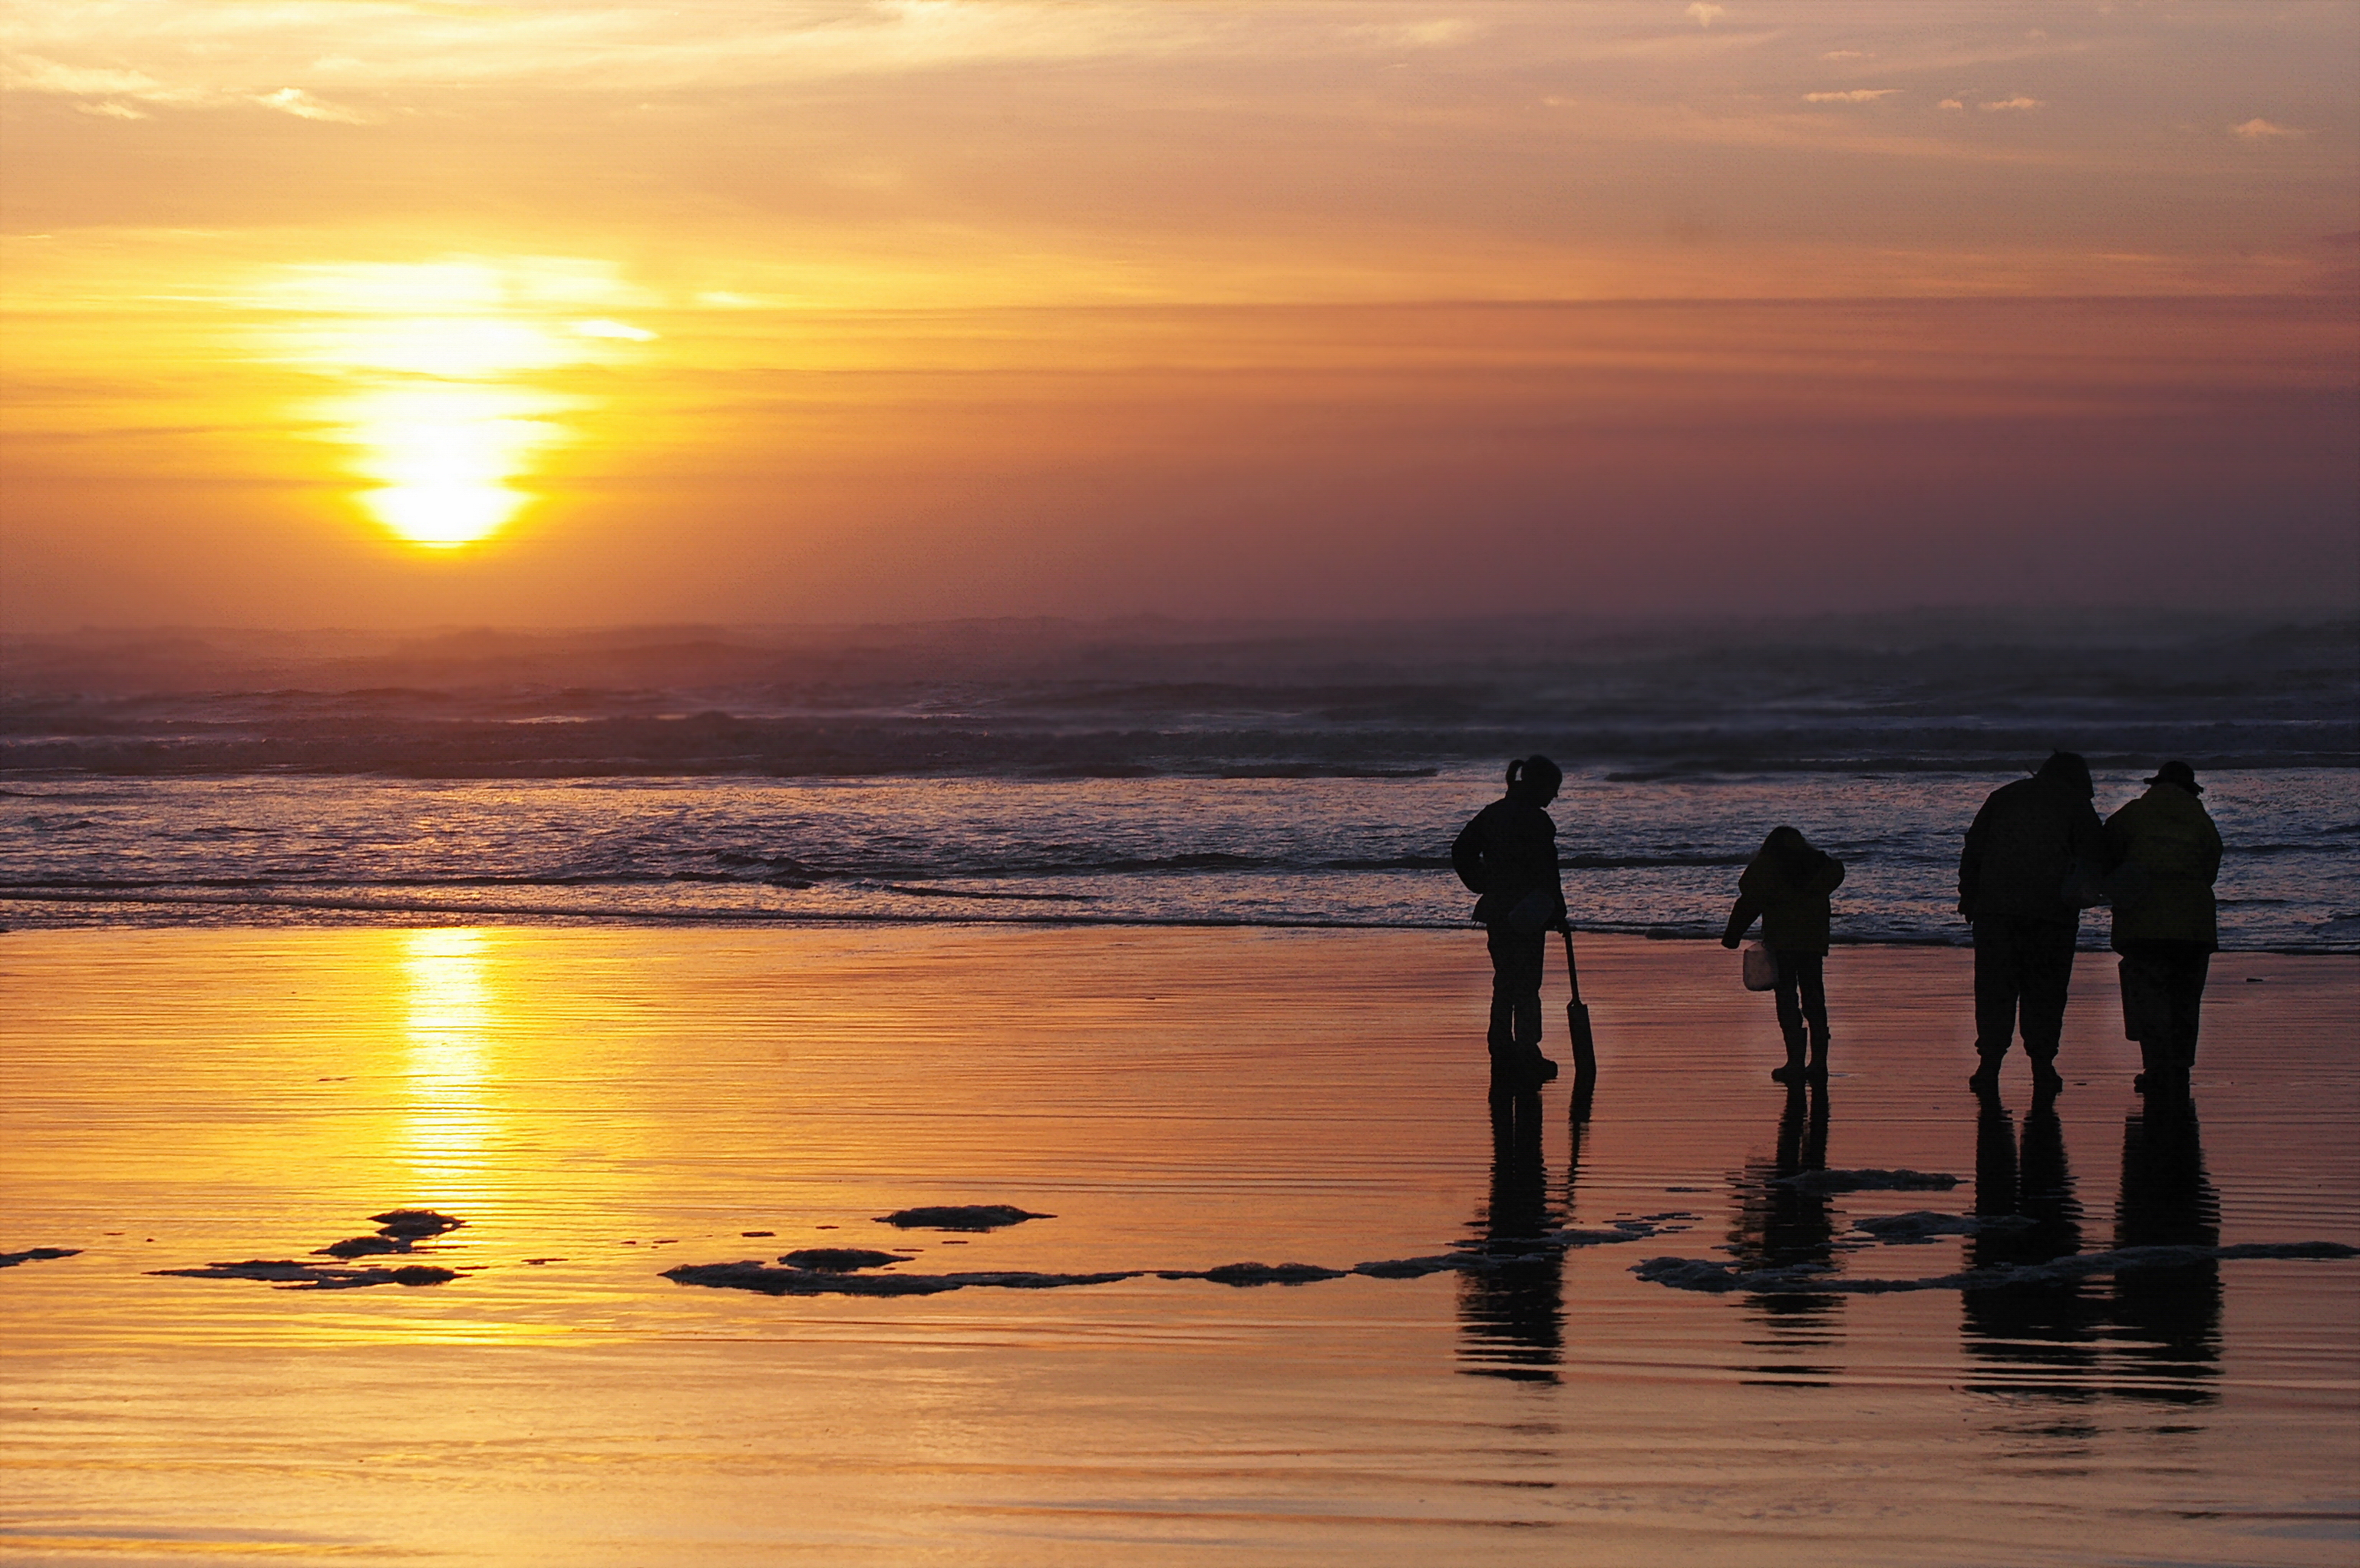 A group of four people are seen in the distance on a Washington beach, digging for razor clams at sunset.